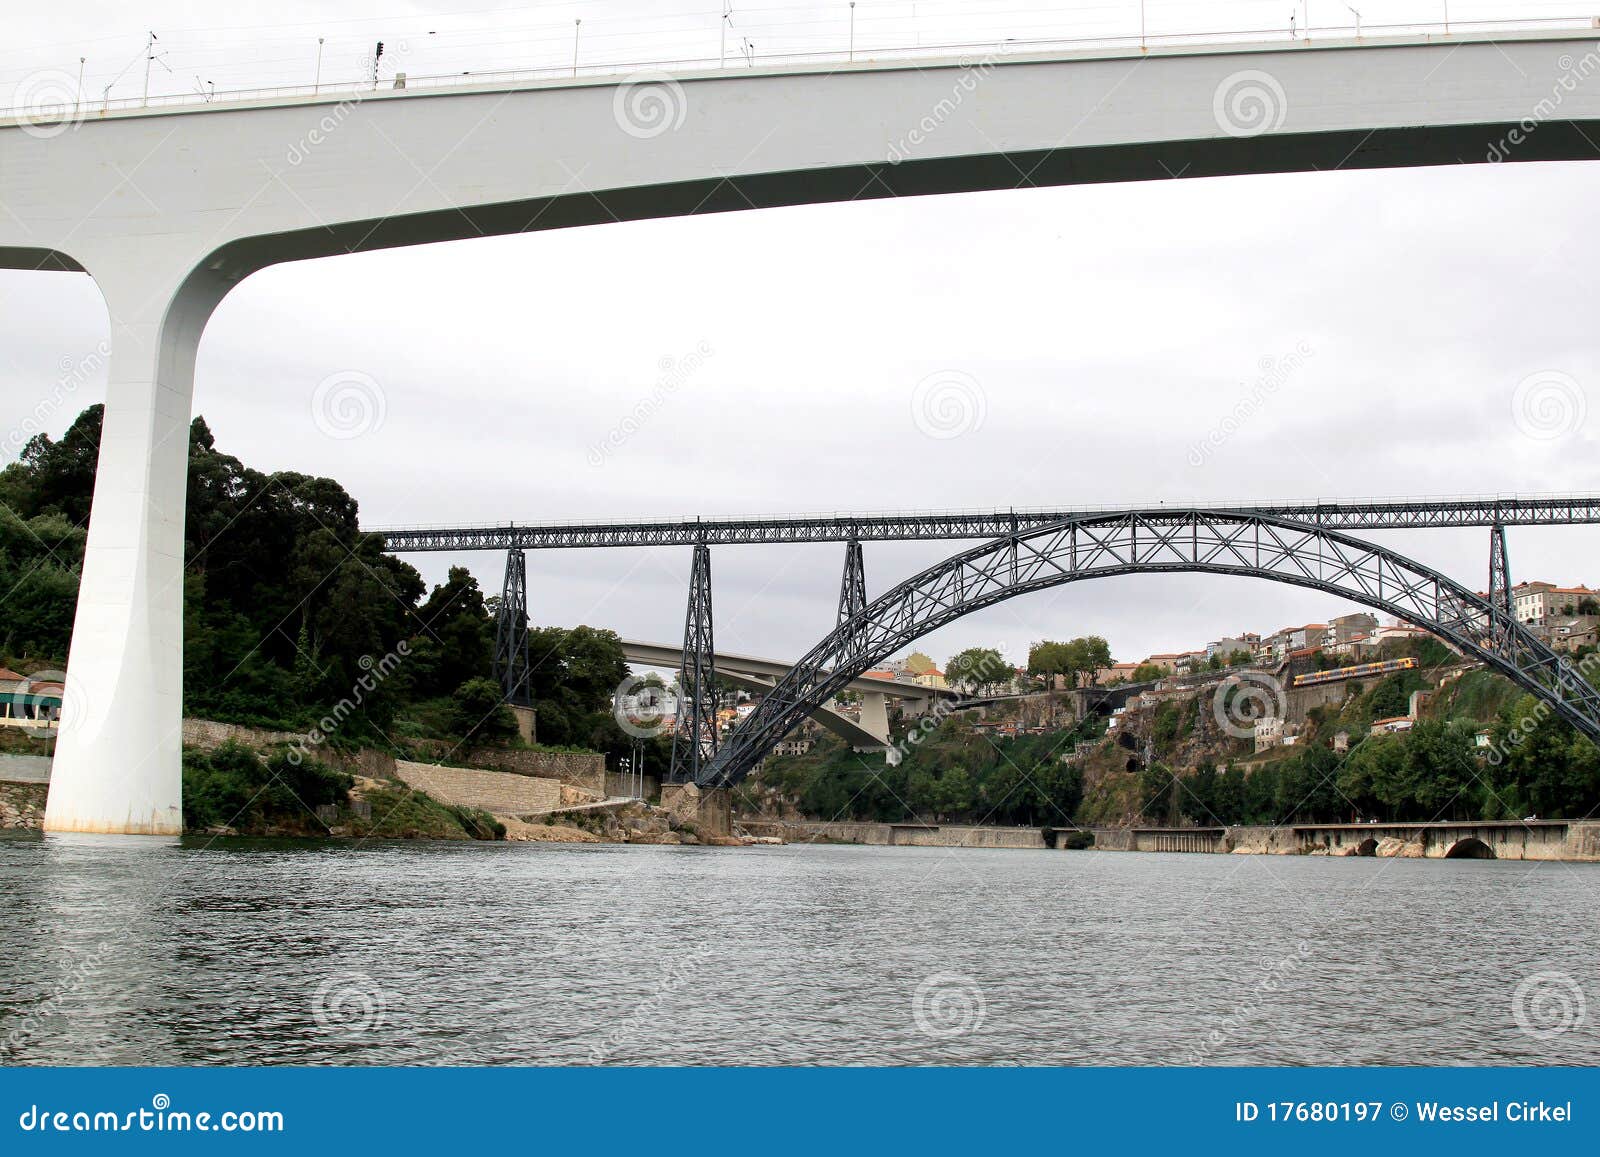 old and modern railway bridges in oporto, portugal